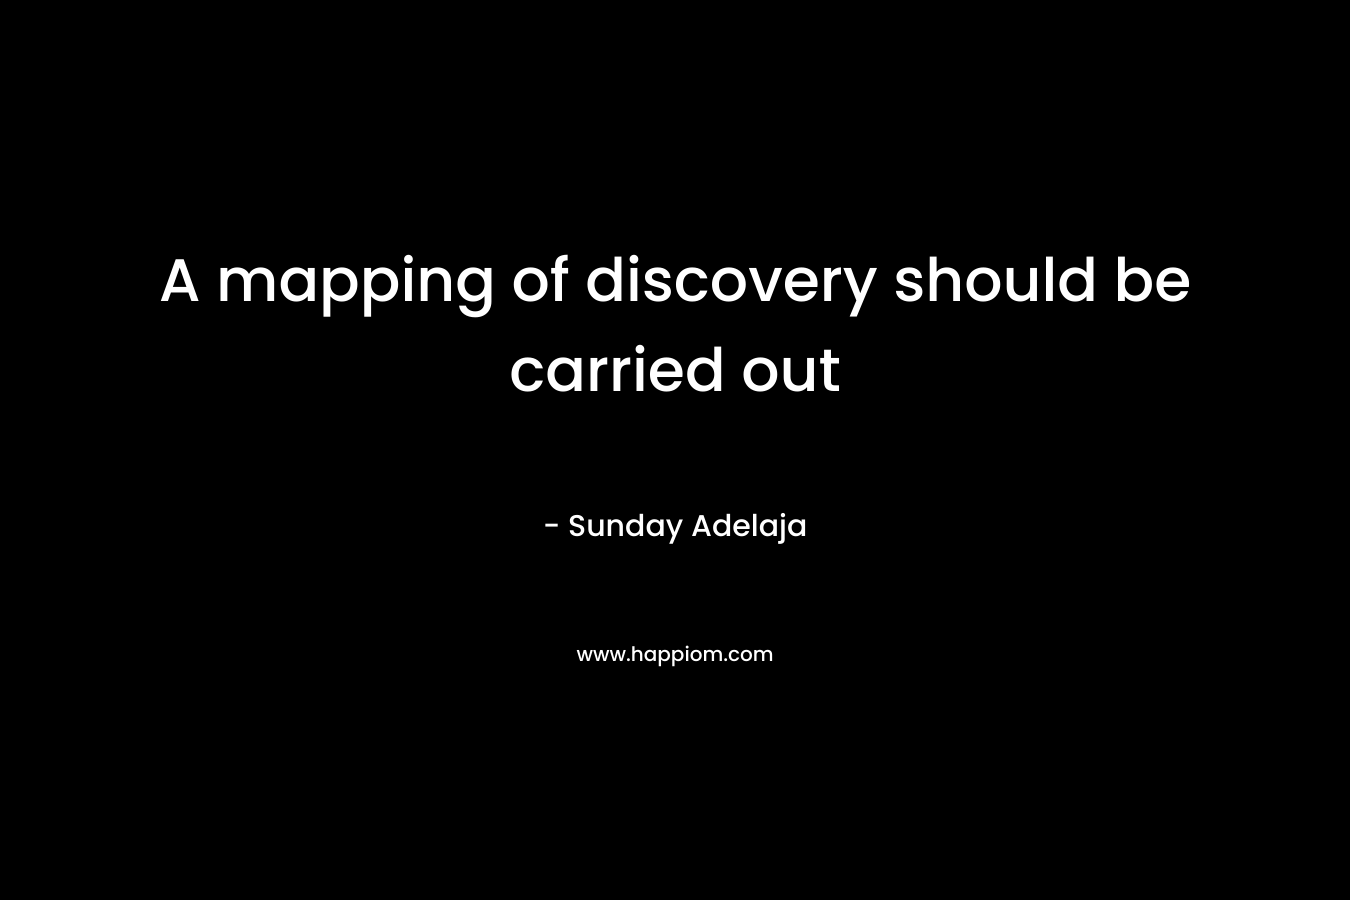 A mapping of discovery should be carried out